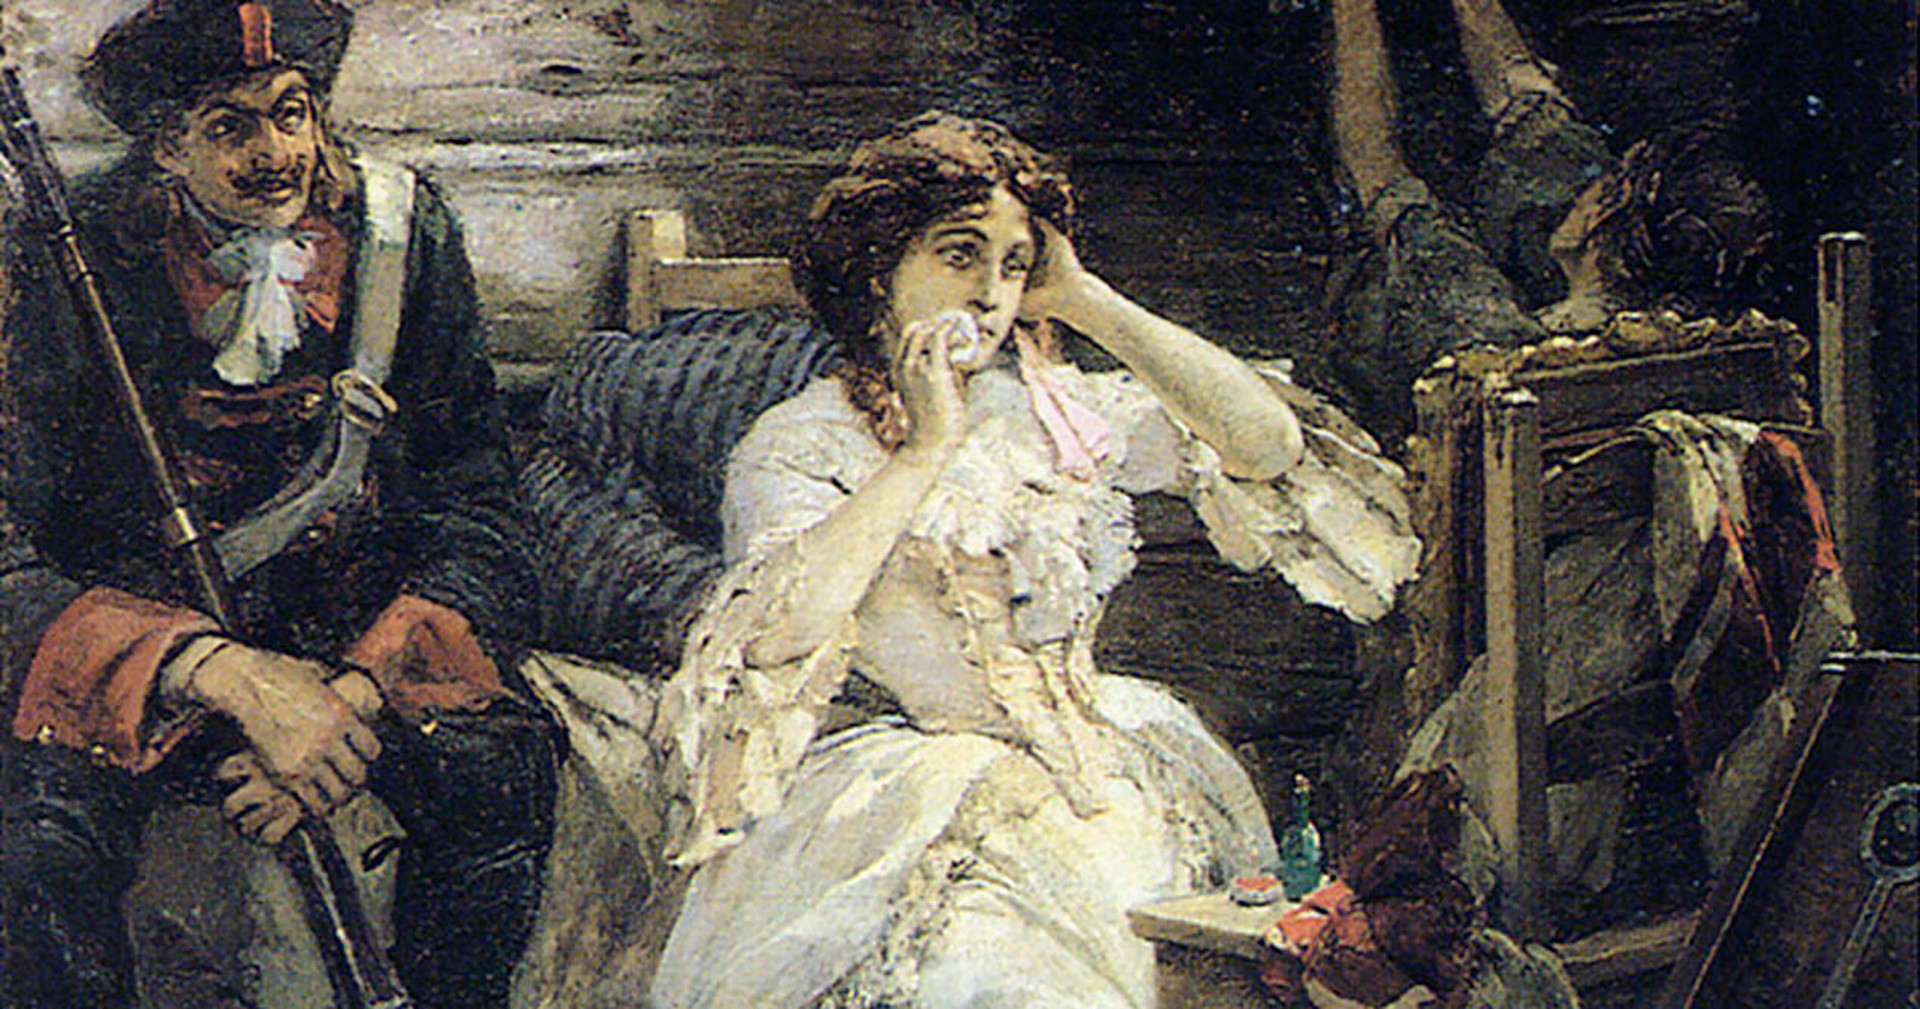  Mary Hamilton before her execution. Painting by Pavel Svedomskiy.